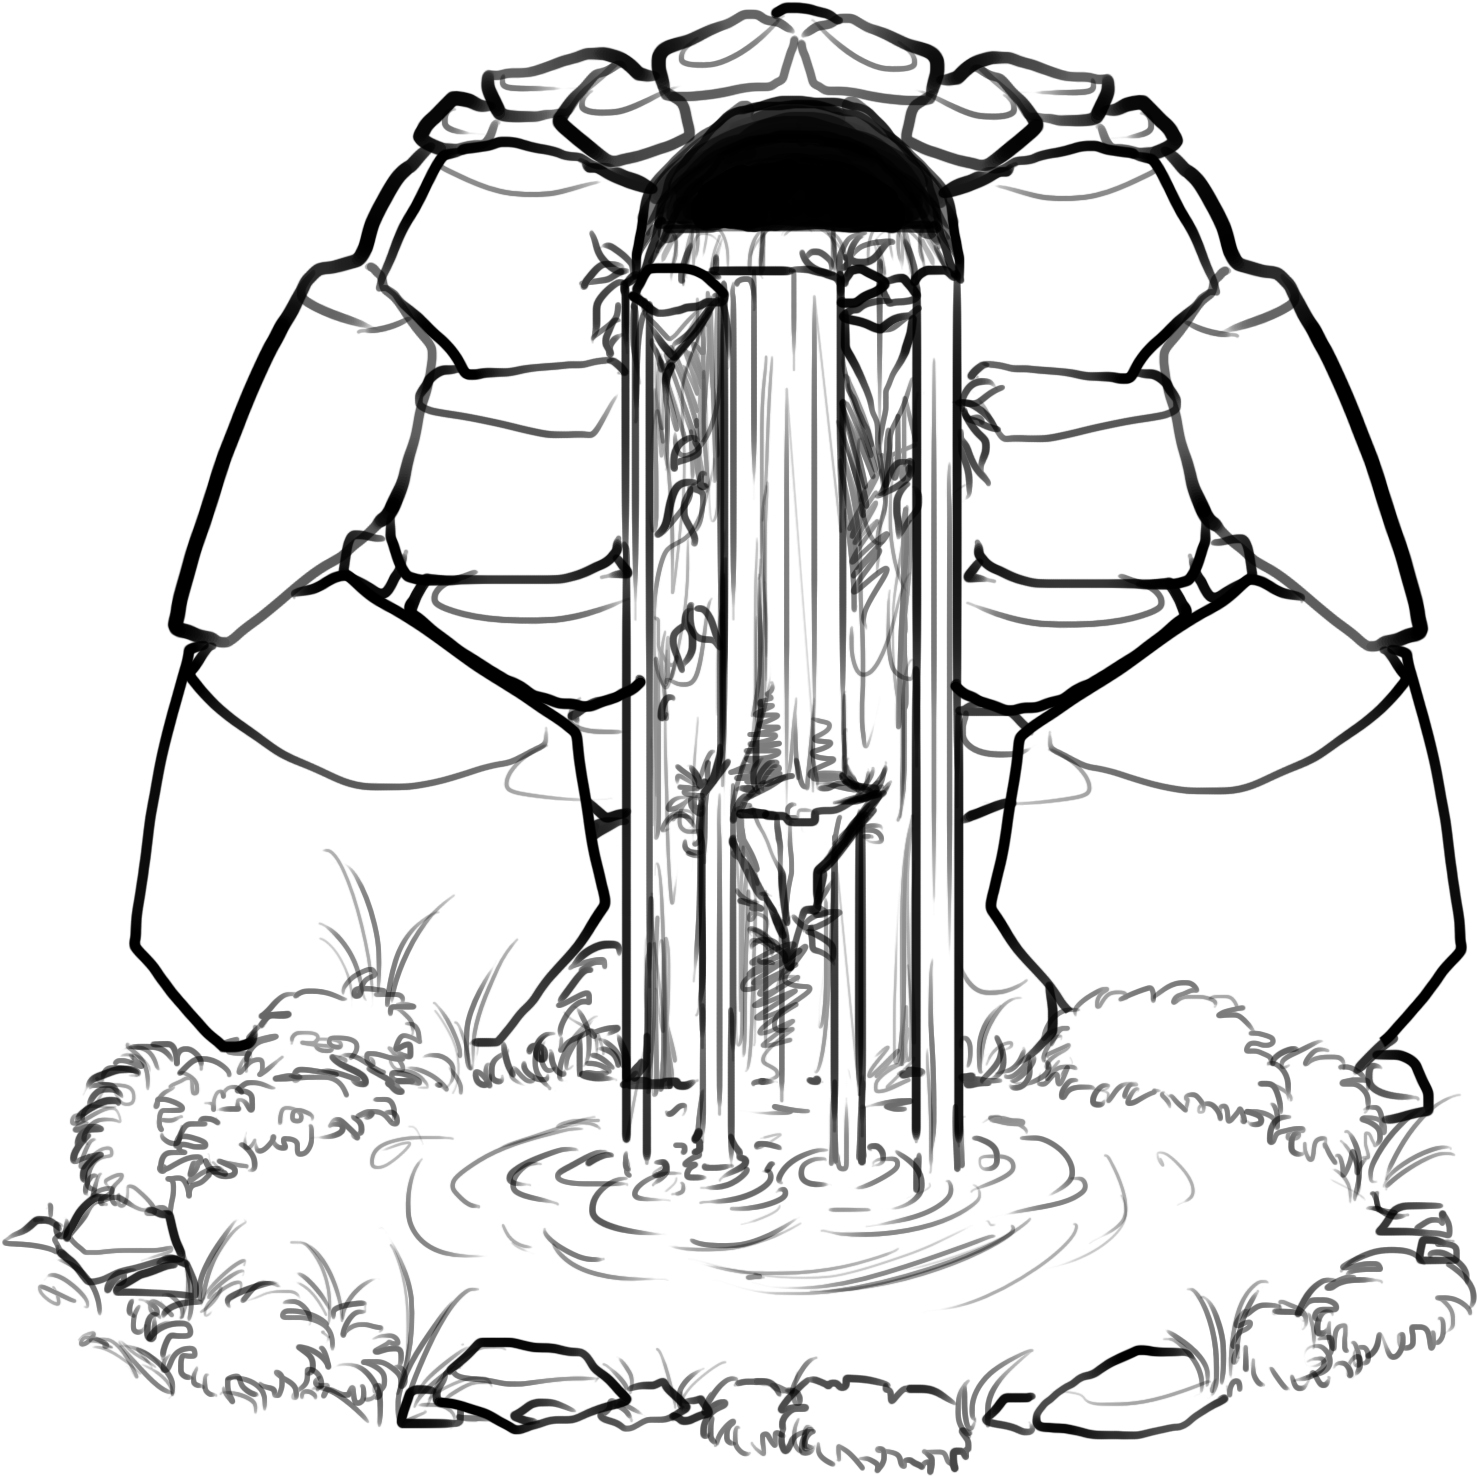 Waterfall and Pool Coloring Page